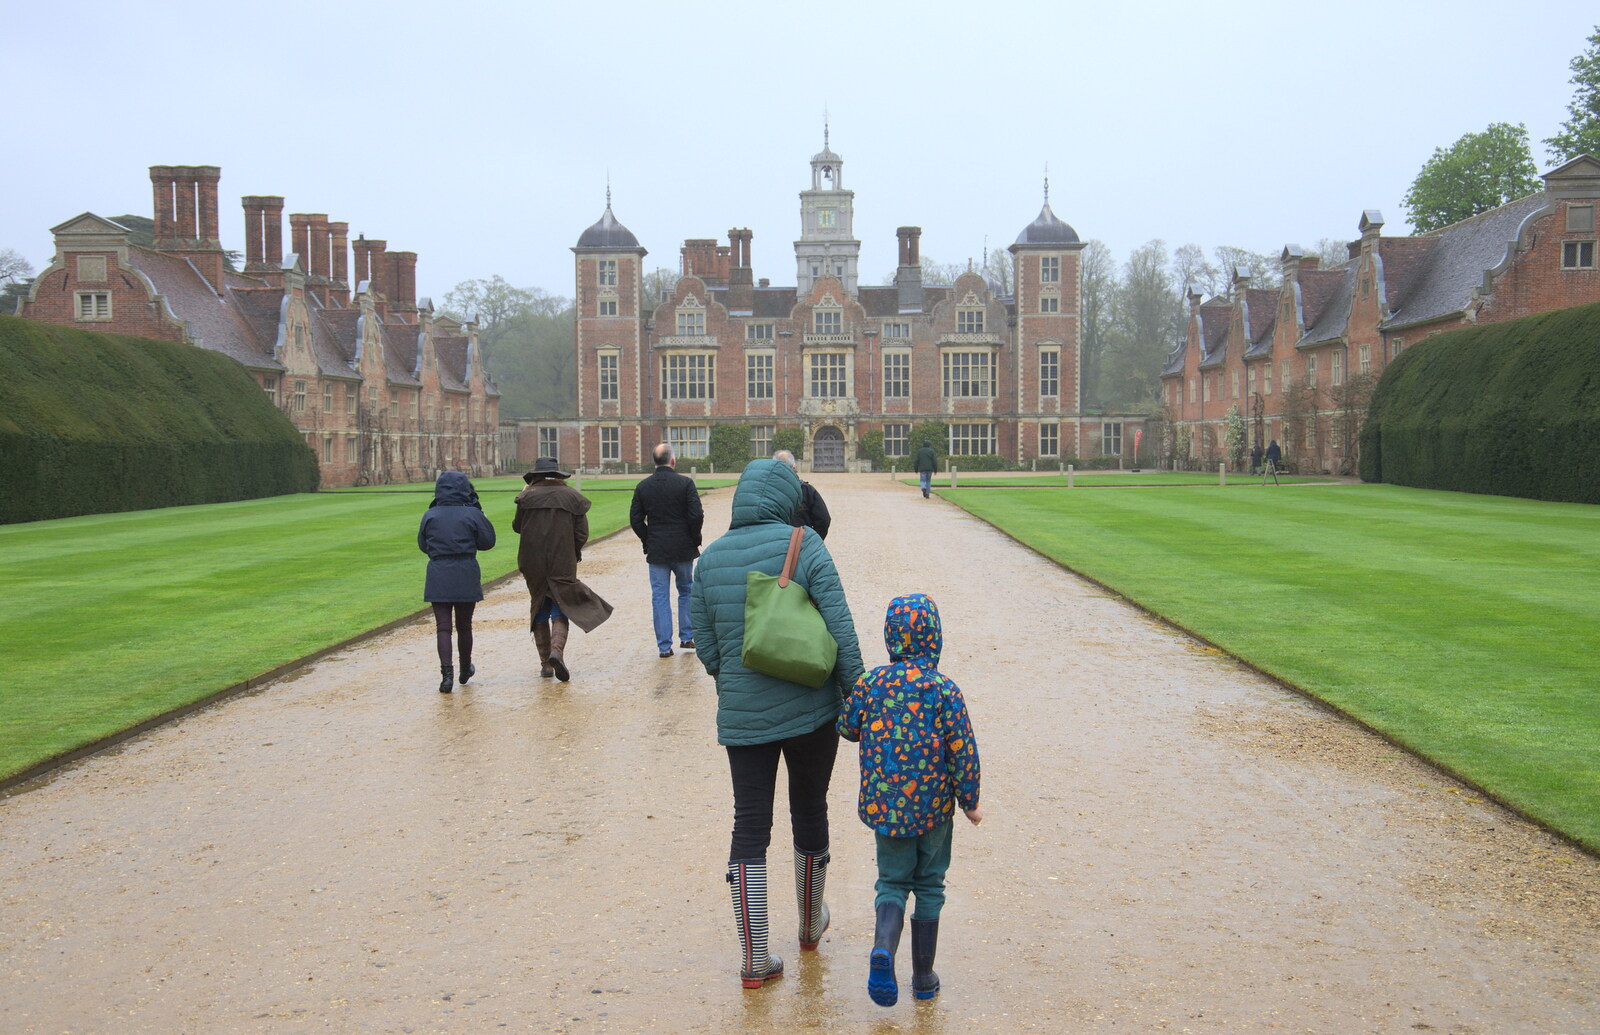 The gang head up to Blickling Hall, on a wet day from A Trip to Blickling Hall, Aylsham, Norfolk - 29th April 2018